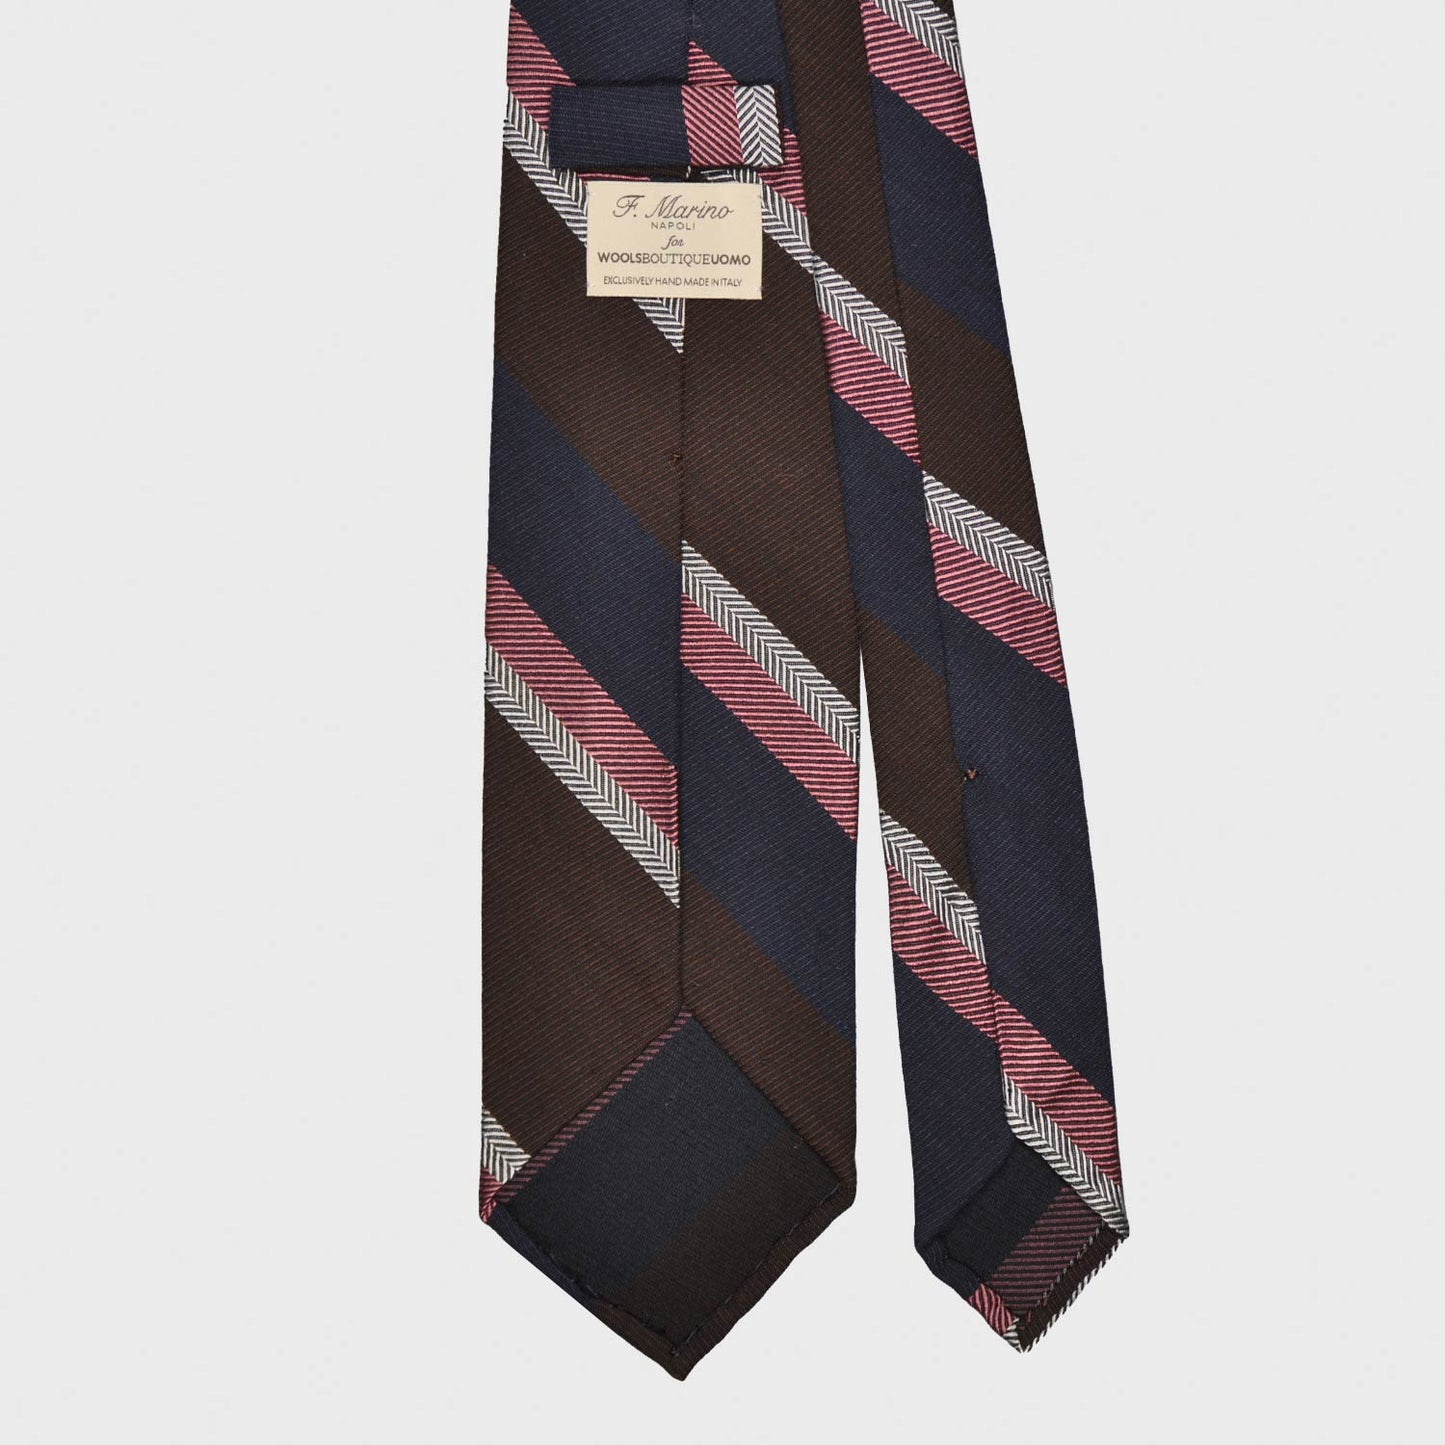 Load image into Gallery viewer, Elegant regimental necktie made with silk and wool, hand rolled edge, unlined 3 folds, coffee brown and navy blue blocks with pink and silver striped, F.Marino Napoli ties exclusive for Wools Boutique Uomo
